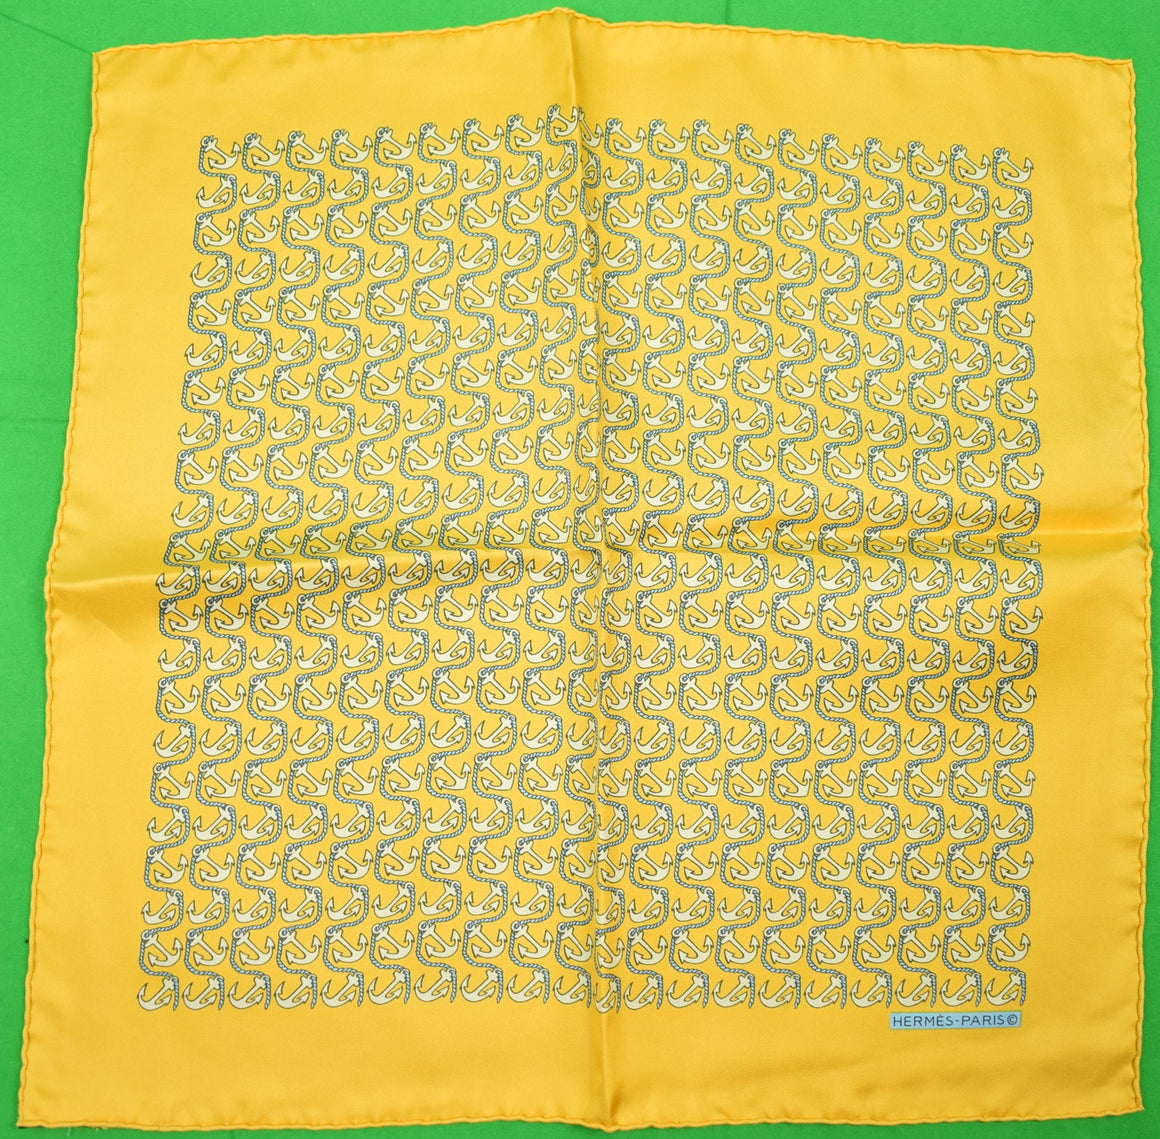 "Hermes Paris 'Anchor Waves' Yellow Silk Pocket Square" (SOLD)